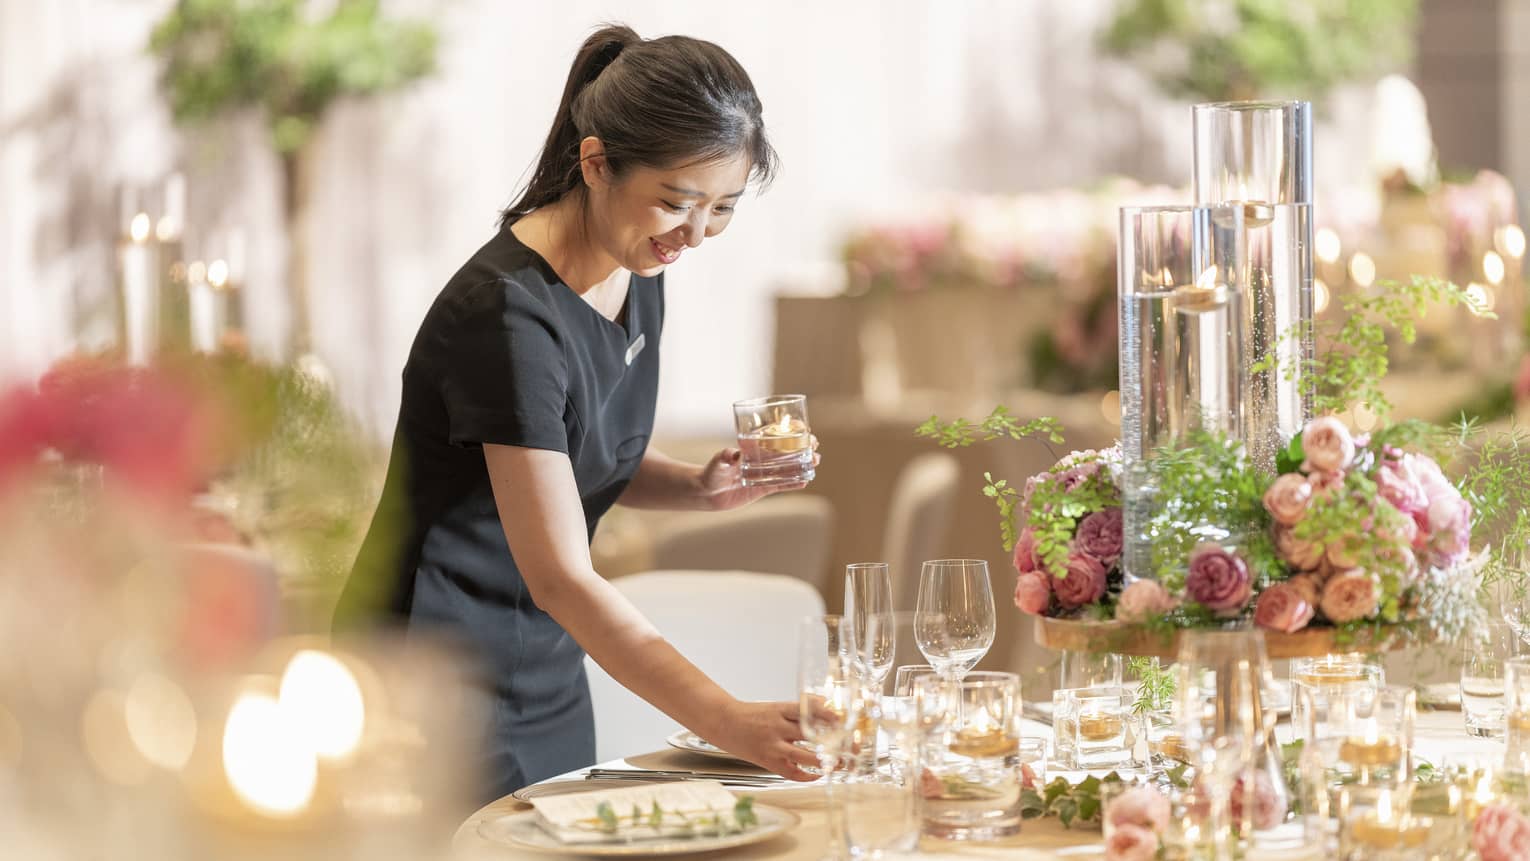 Smiling FS staff member sets table in ballroom with pink flower centrepiece